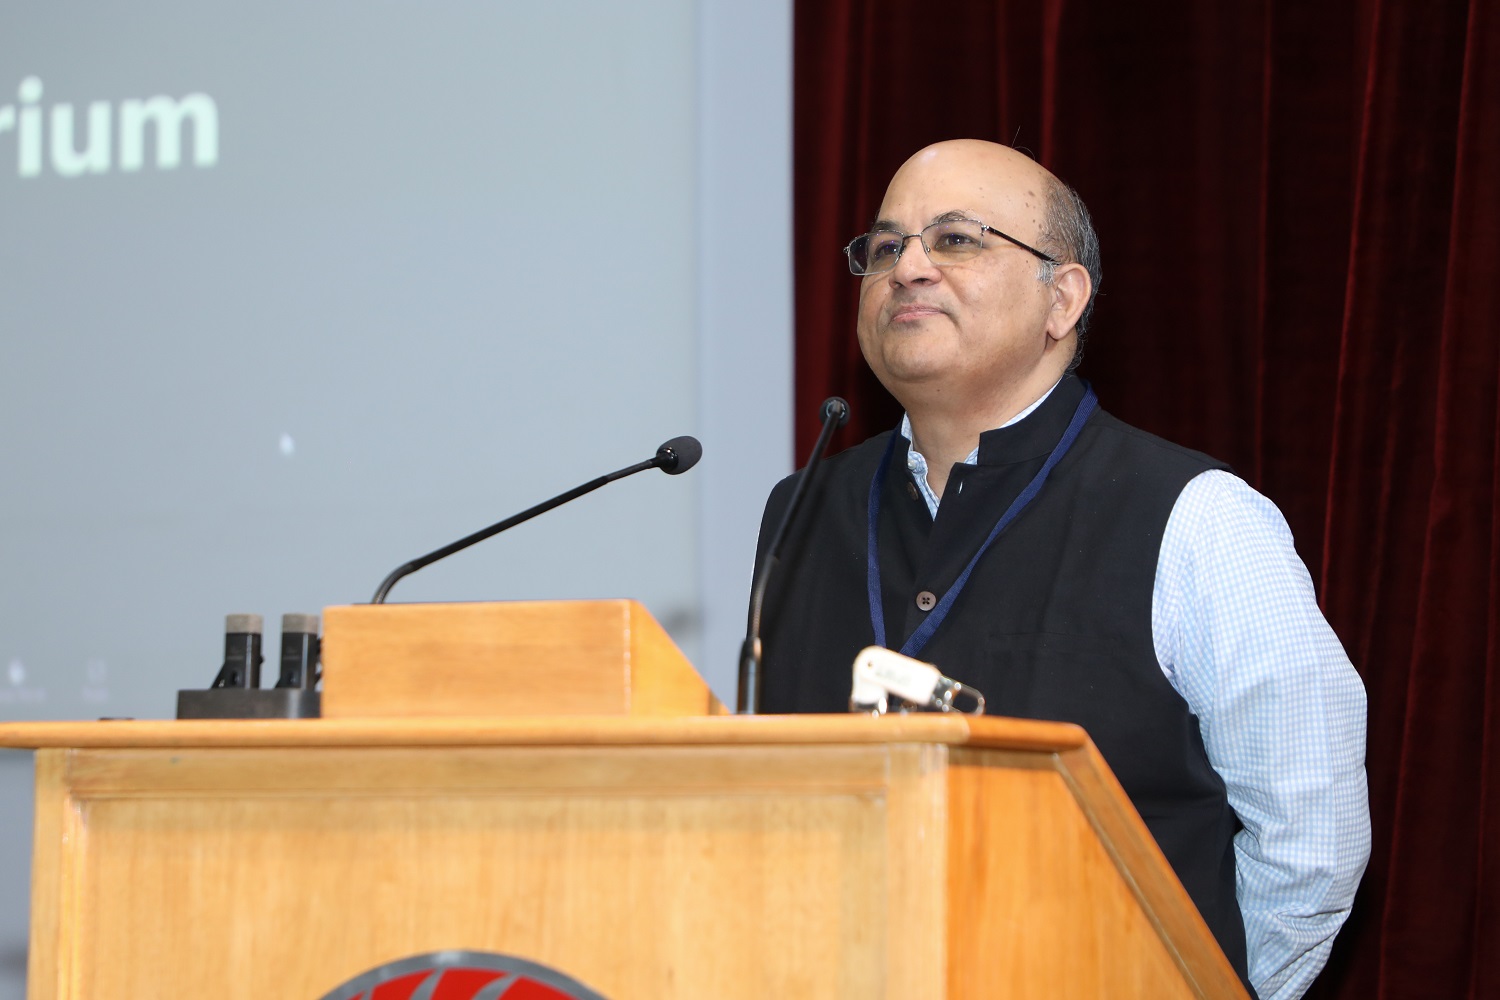 Prof. Rishikesha T Krishnan, Director, IIMB, welcomes all the audience to Day 1 of the SPM Summit India on 3rd March 2023.